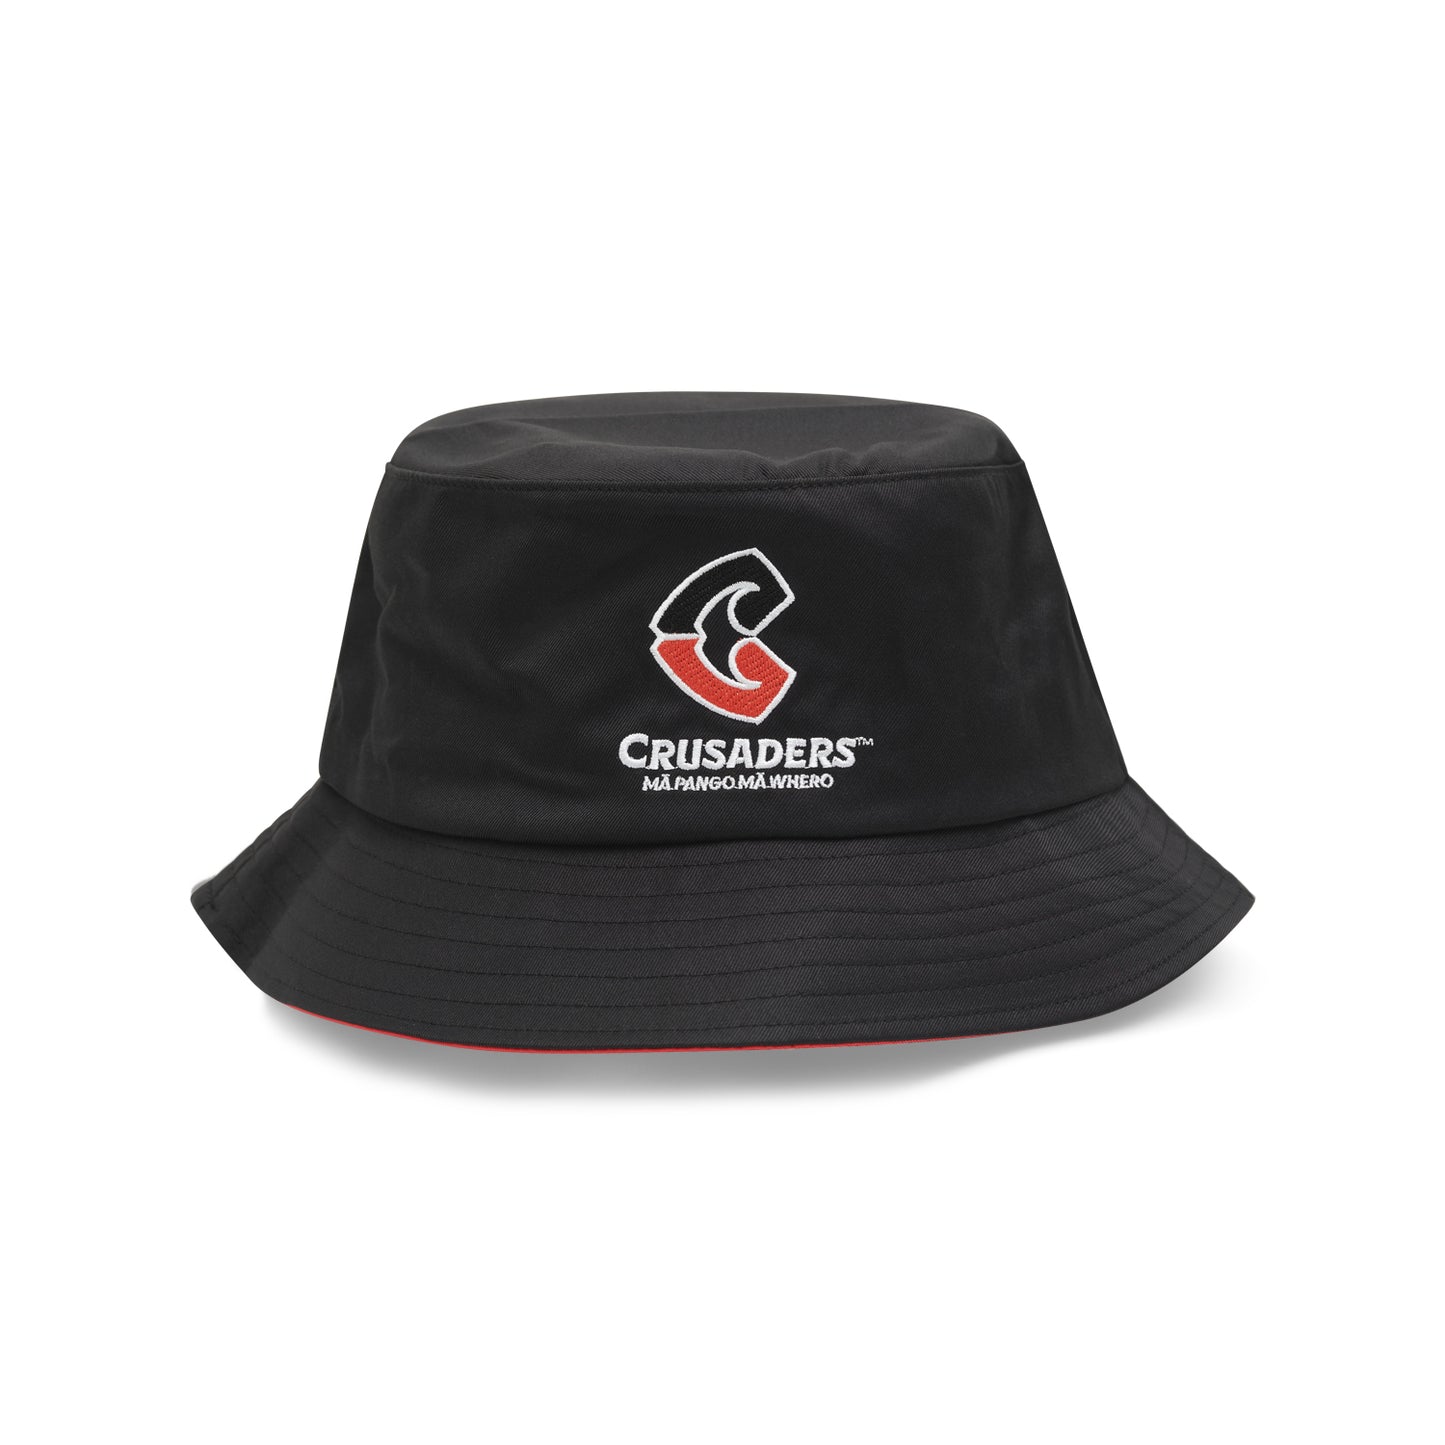 Official Crusaders Rugby Merchandise – New Zealand Super Rugby Clubs